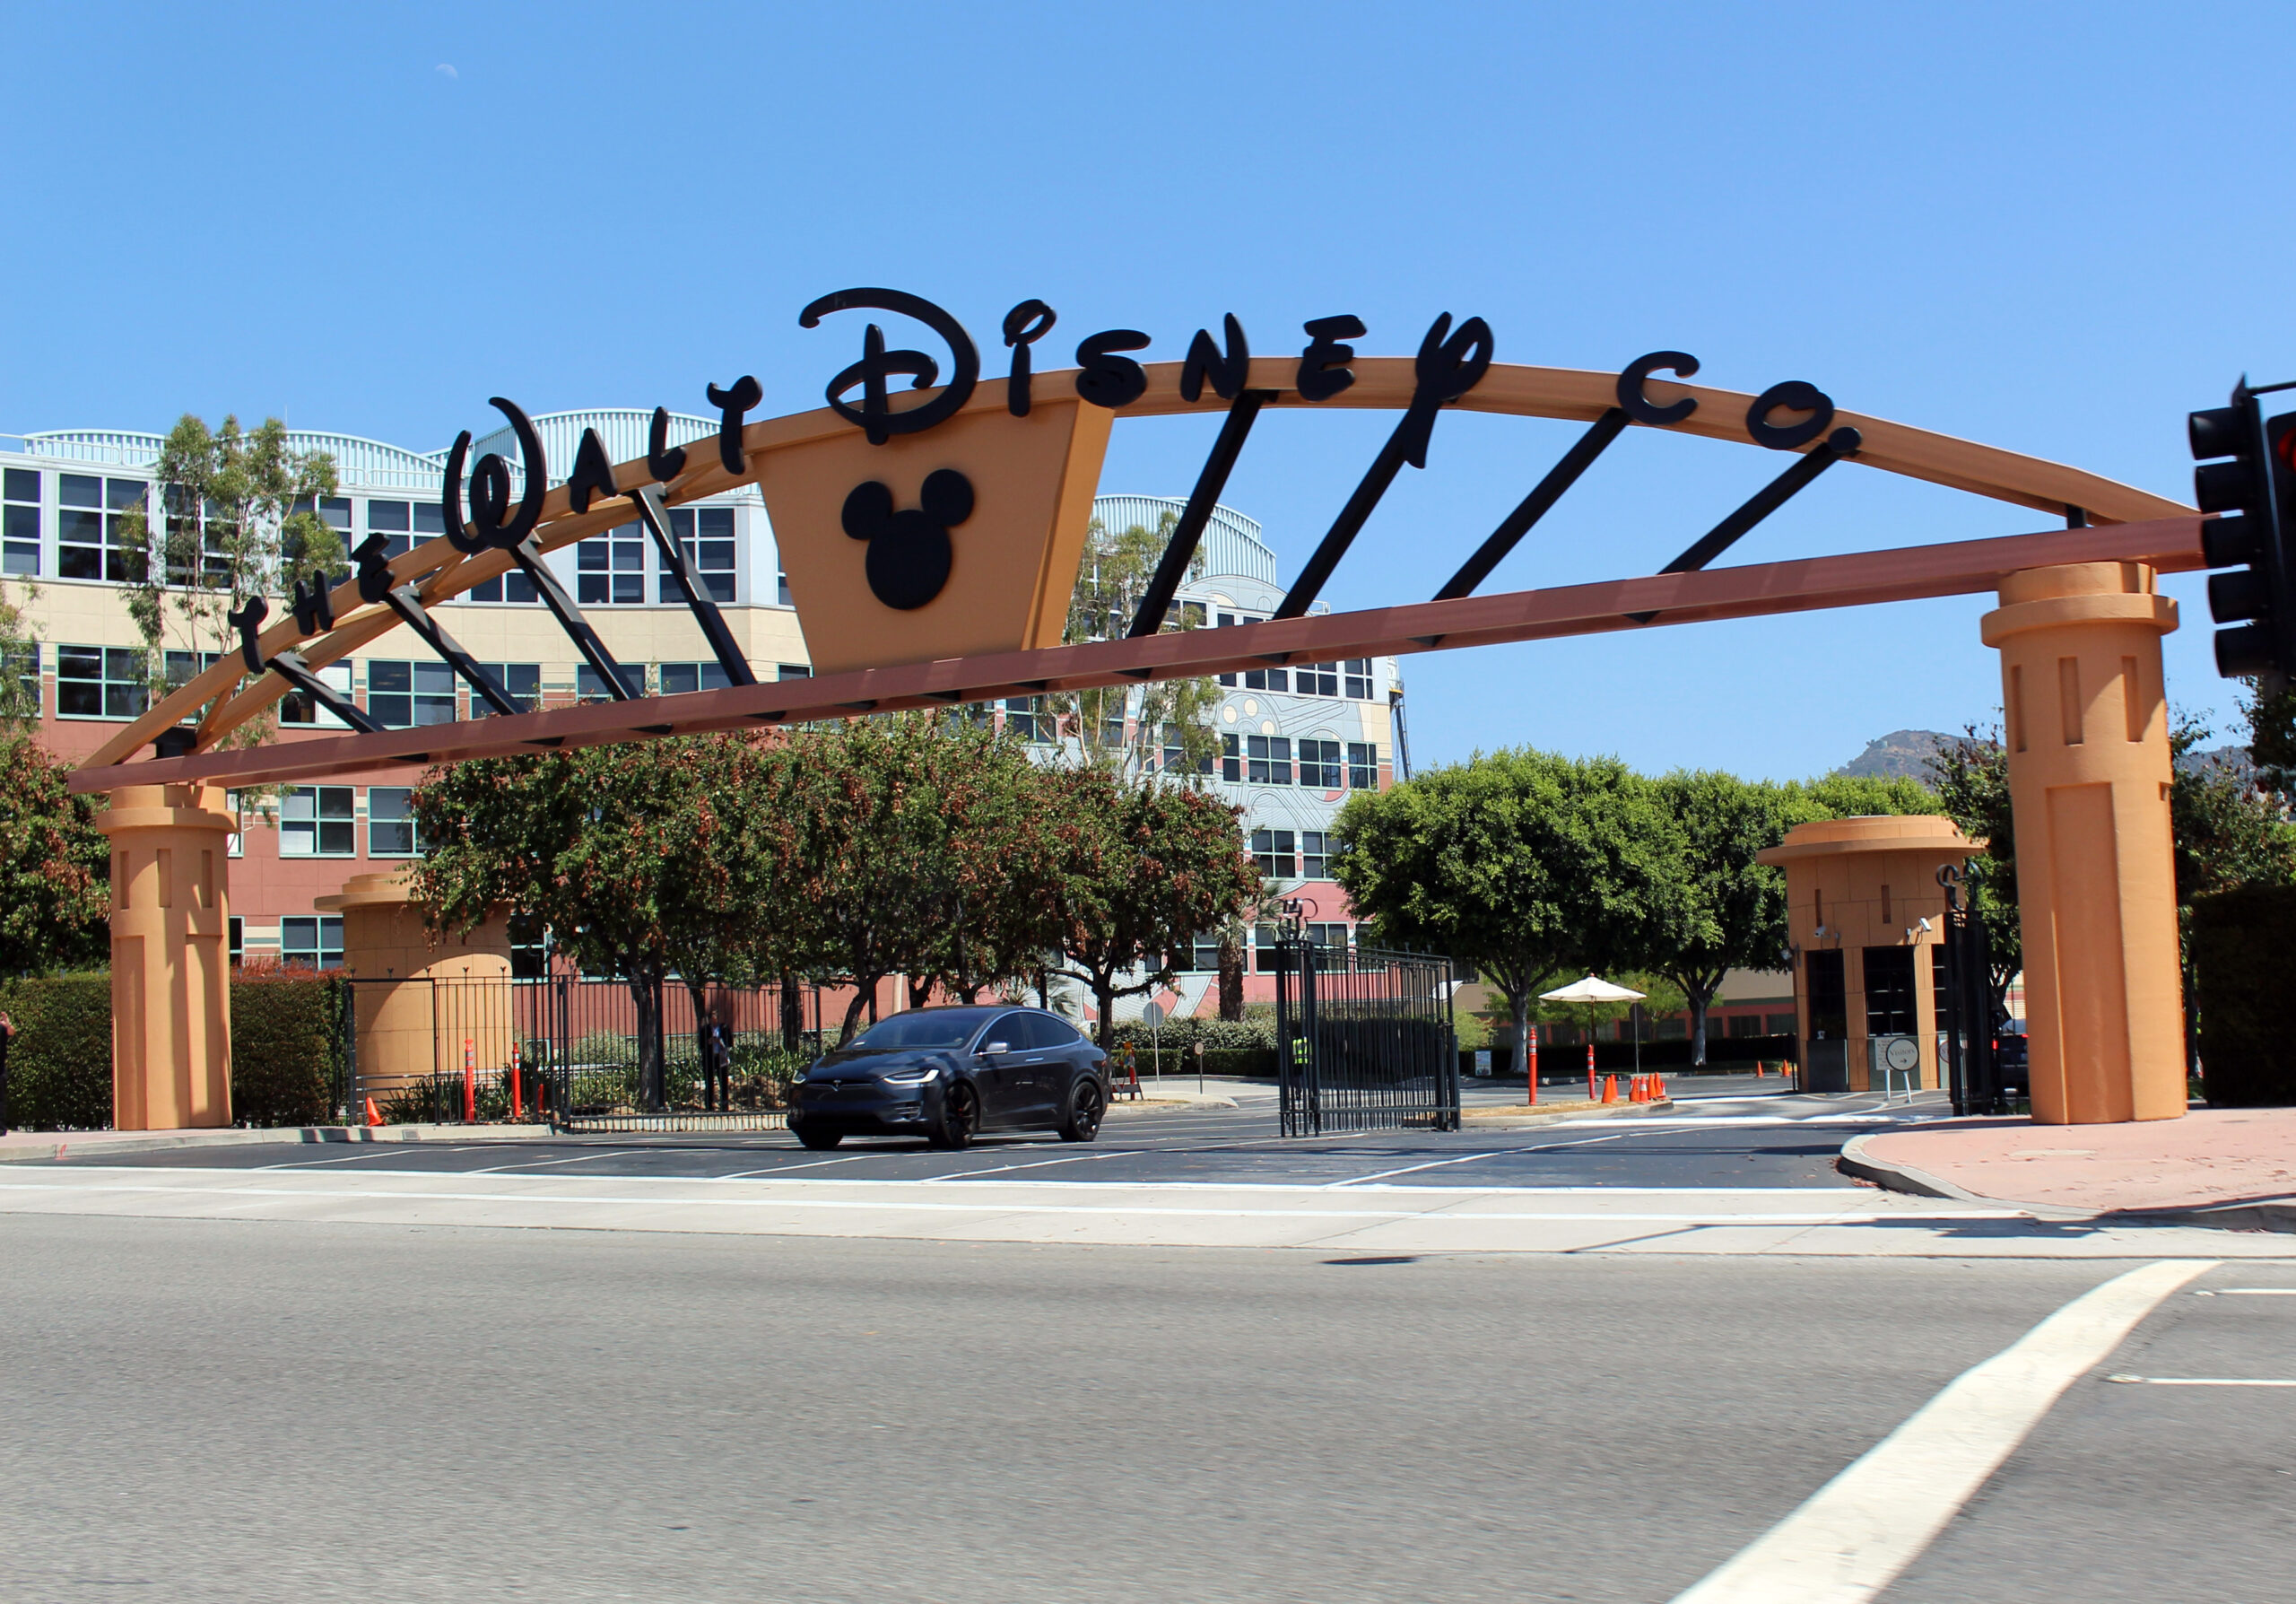 Disney Employees can begin to return to offices this summer